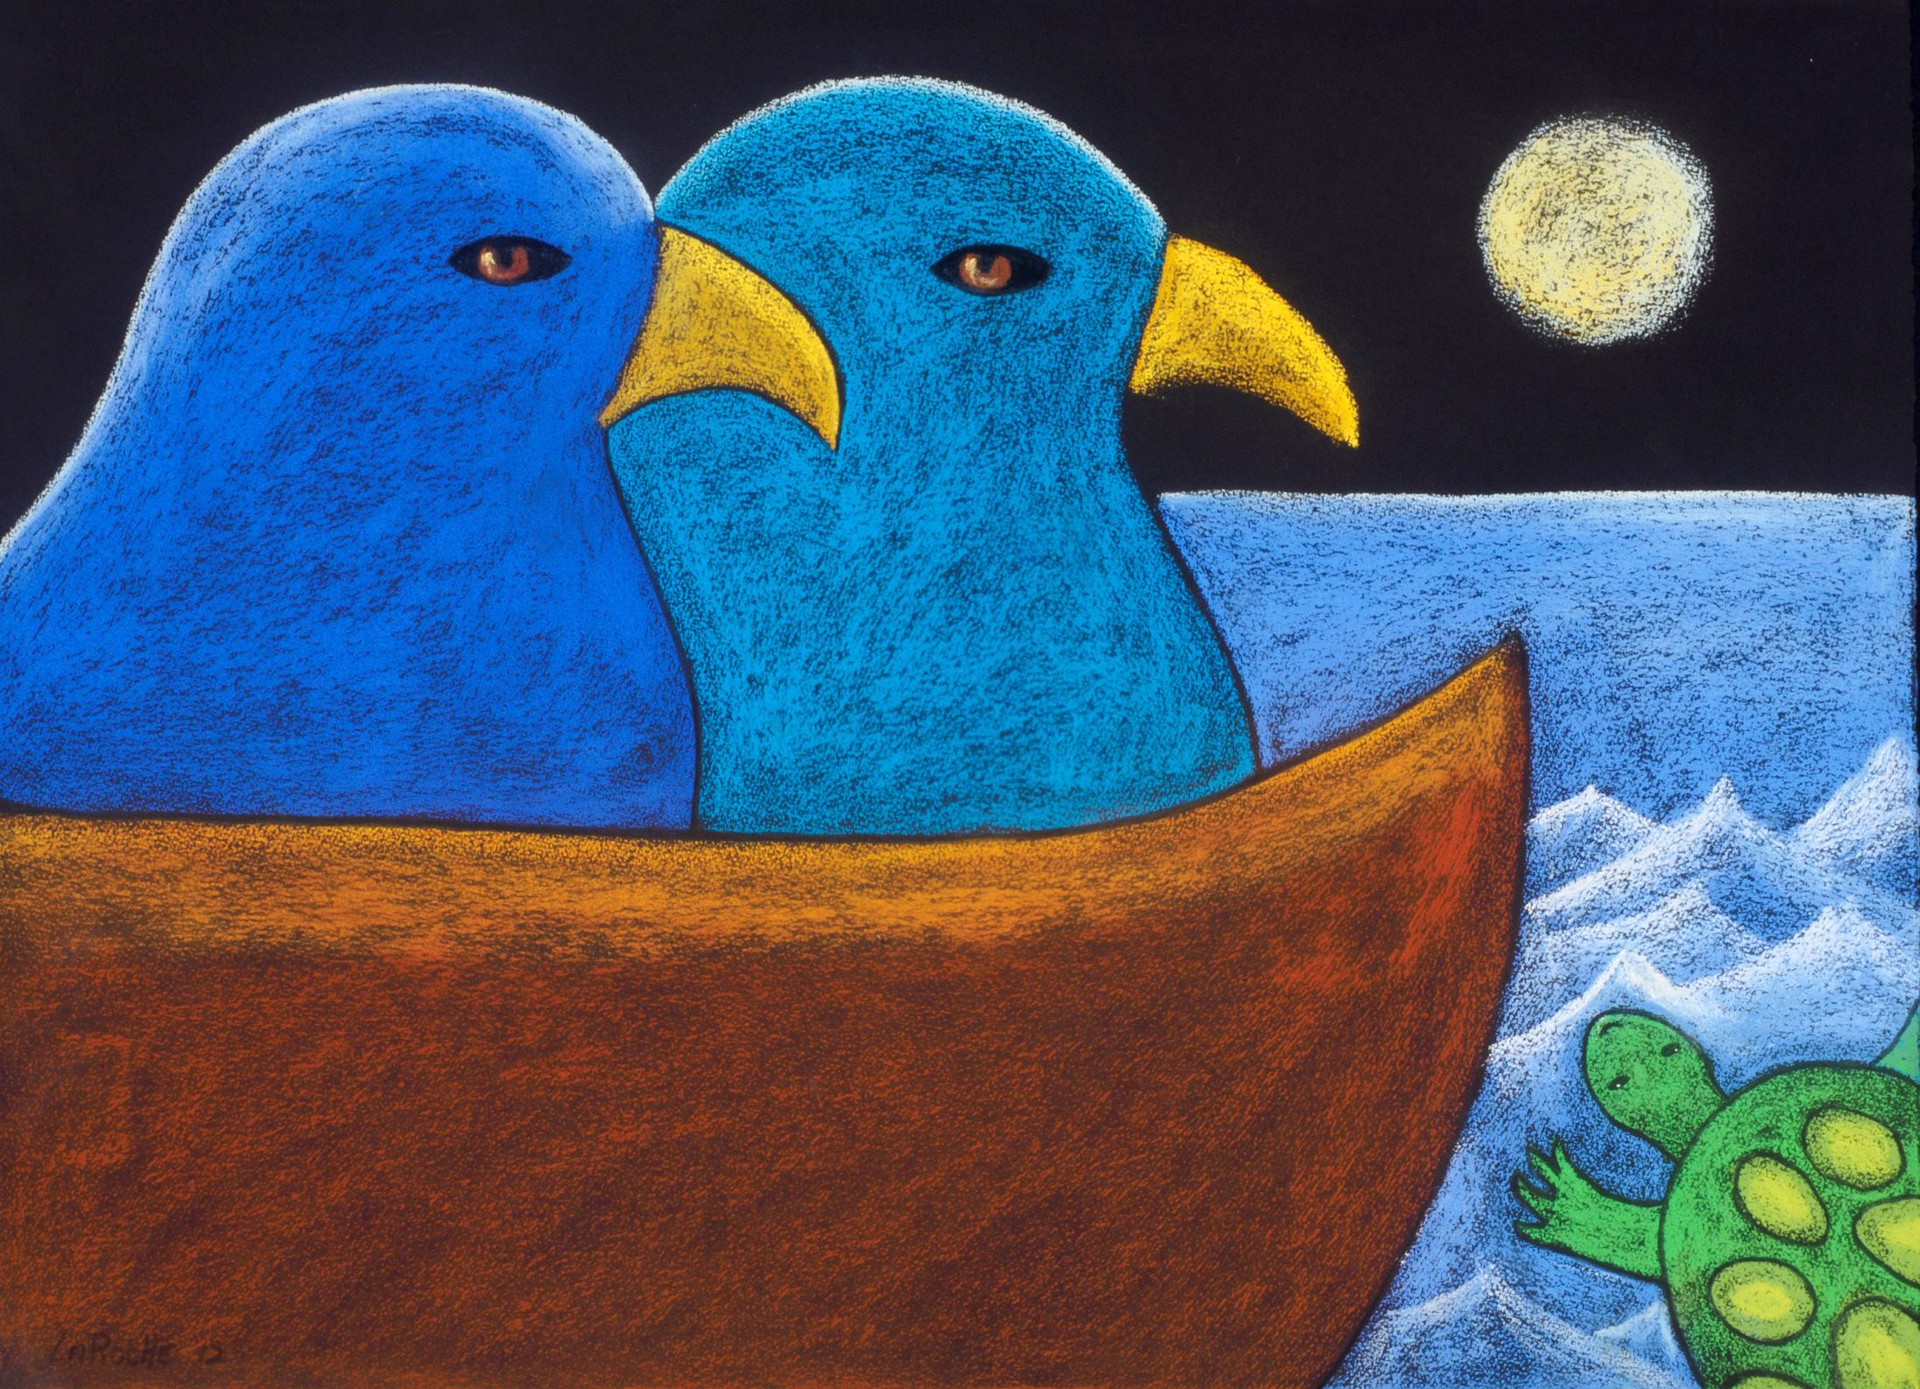 The Ark: Blue Birds of Happiness by Carole LaRoche